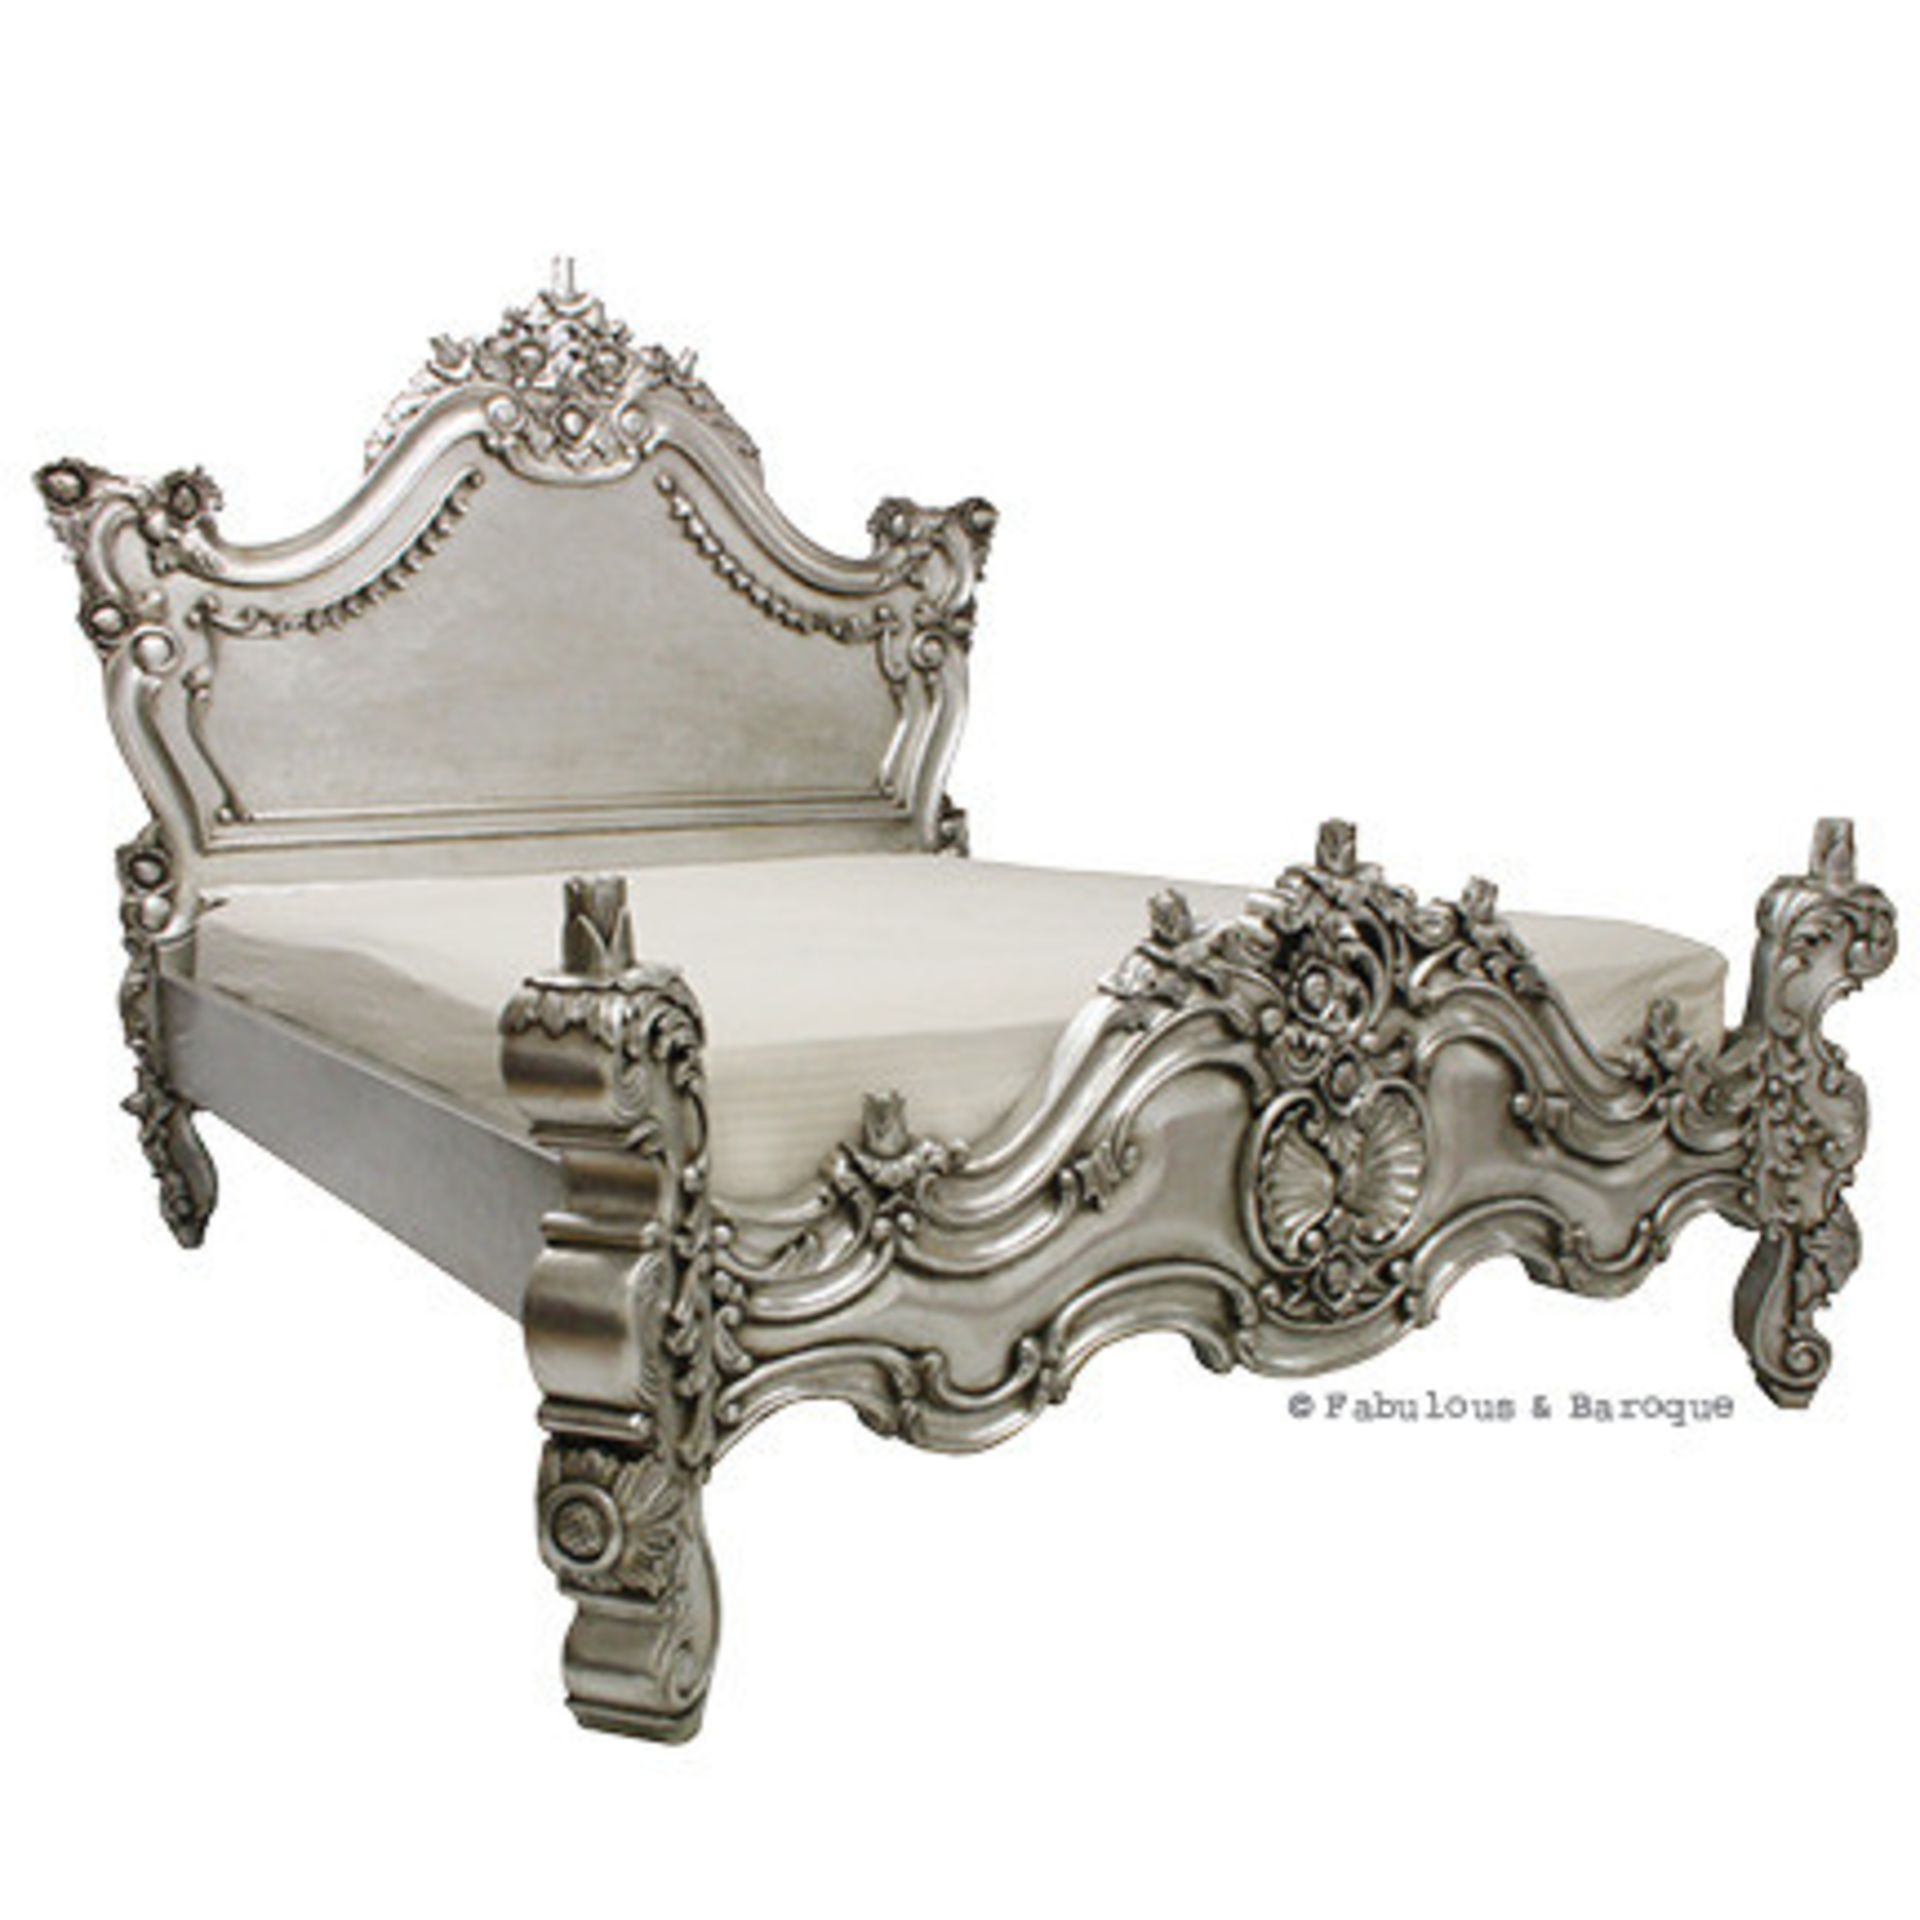 Baroque 4ft 6in double Bed in Silver